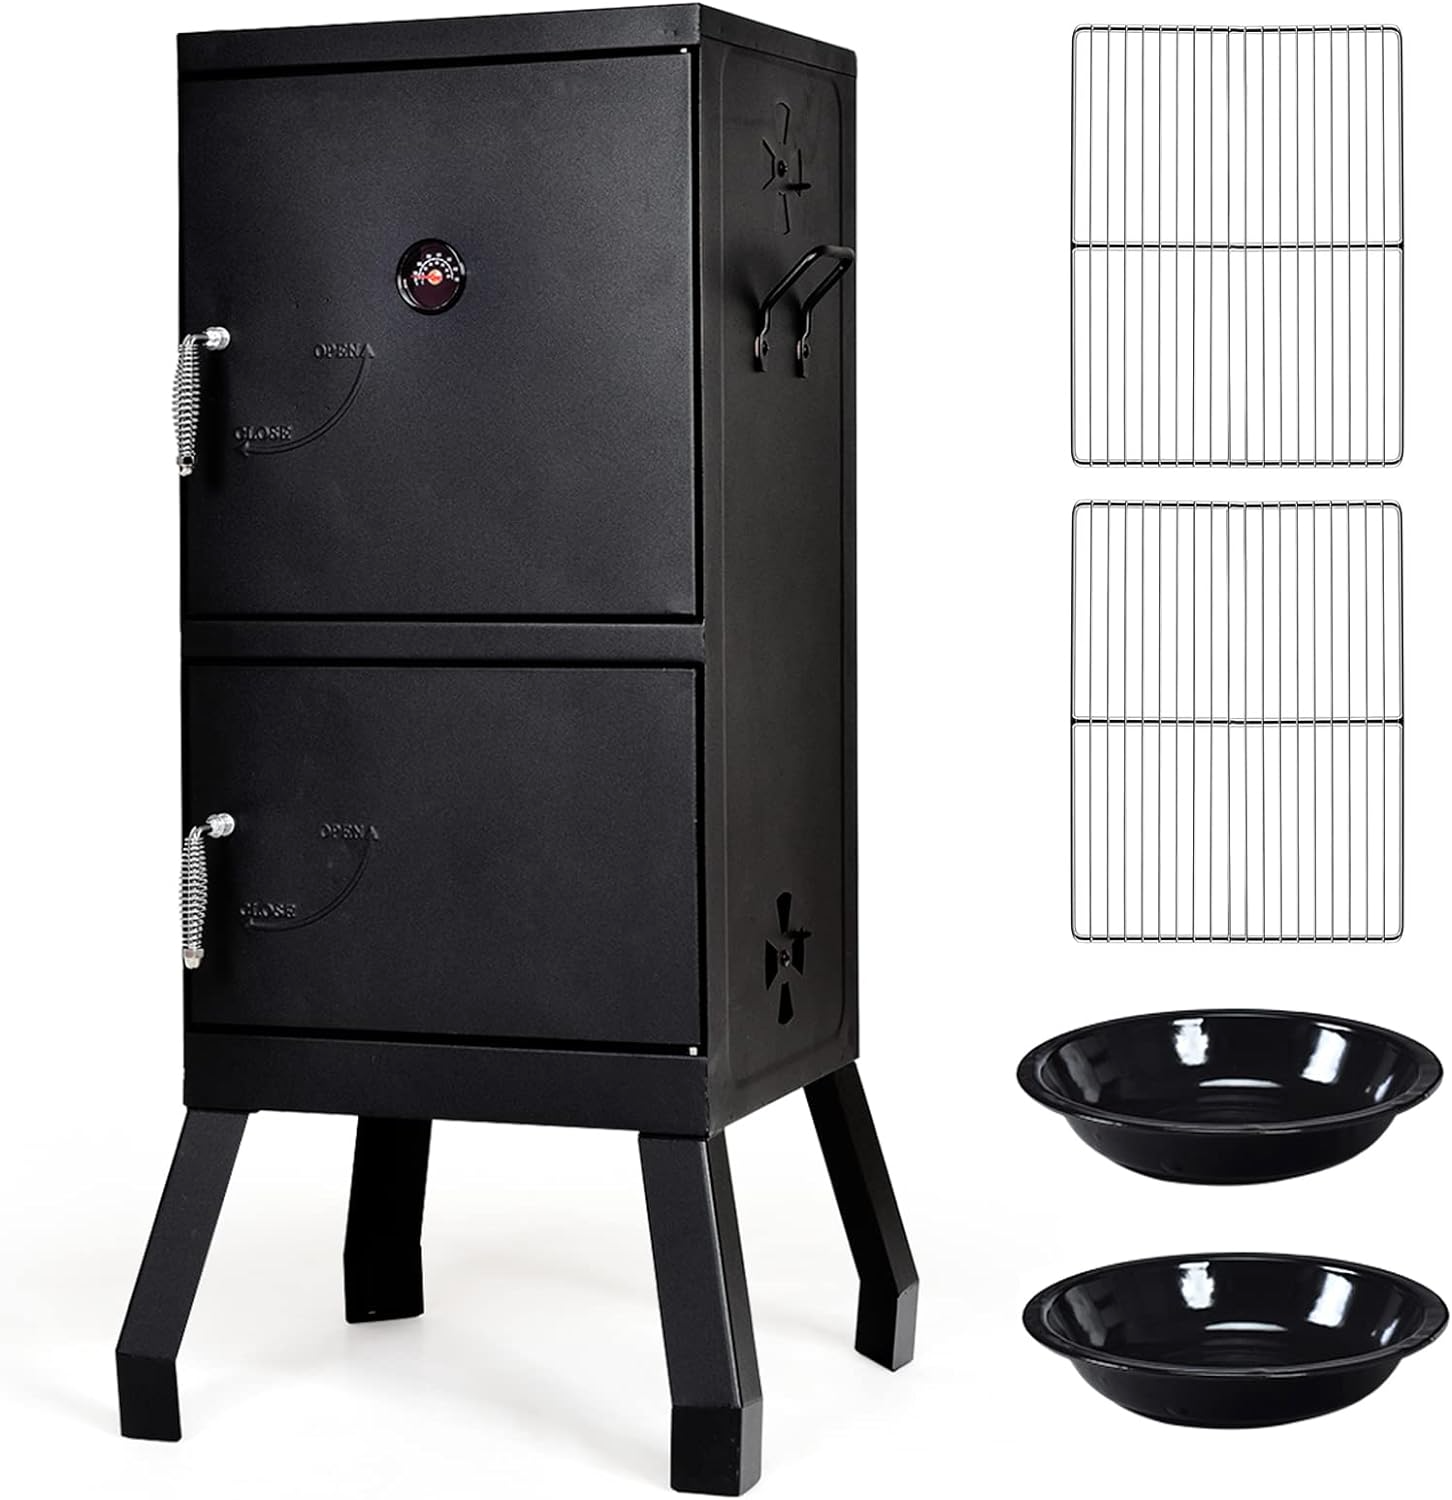 Giantex Outdoor Smoker with Double Doors, 2 Detachable Grill Netting Smoking Racks, Charcoal Pan & Water Pan, 4 Air Vents, Thermometer, Vertical Charcoal Smoker for Barbecue Camping Backyard Grill - Barbecue Whizz...Watch My Smoke!